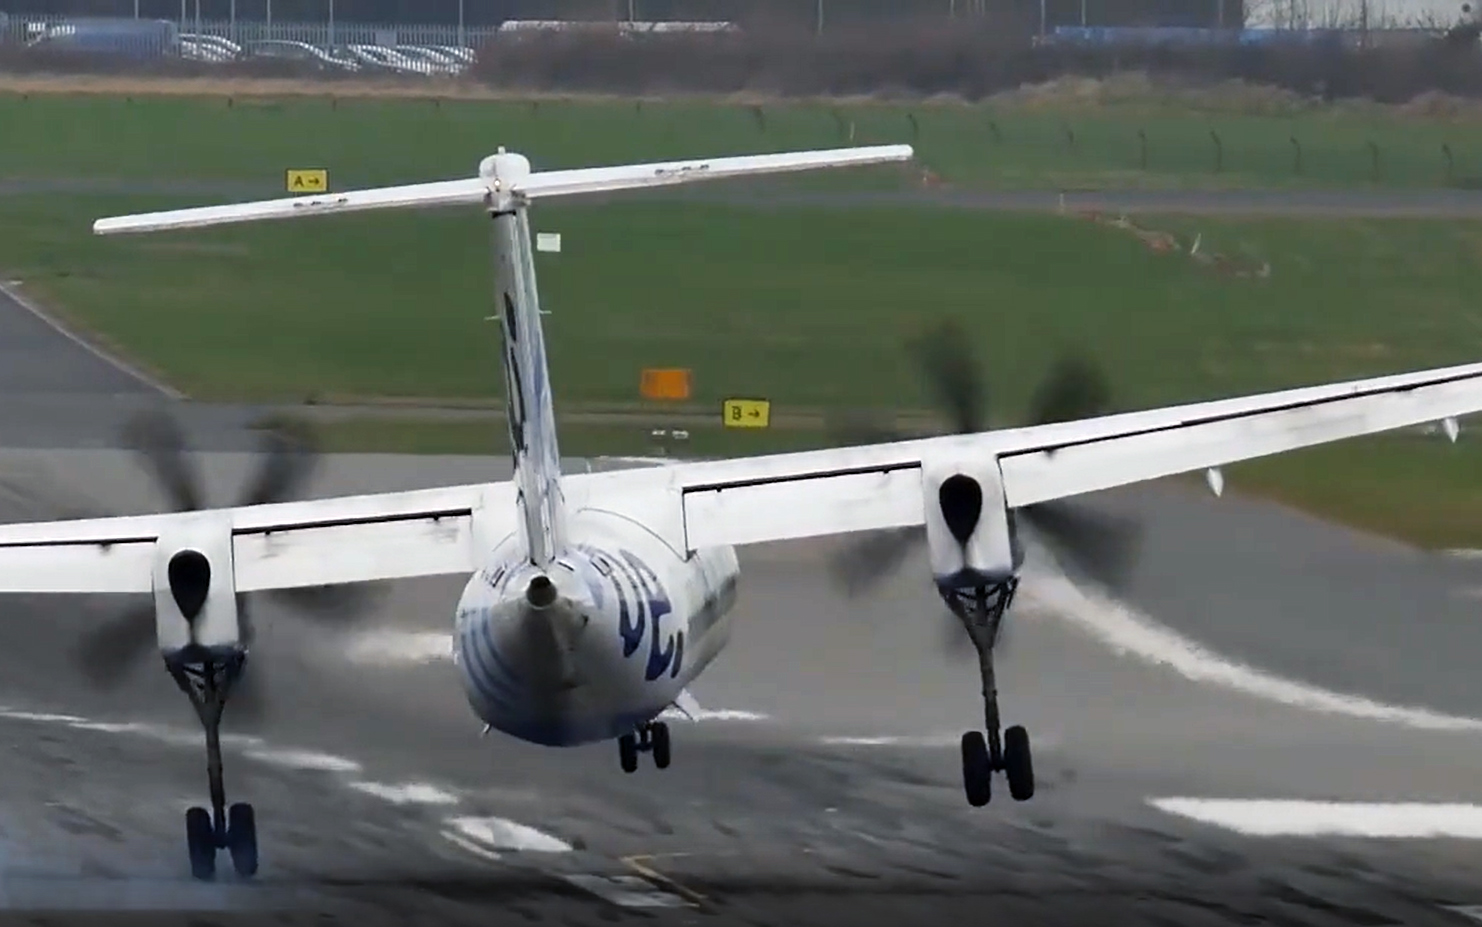 Cross wind landings can be challenge for passengers making many sick